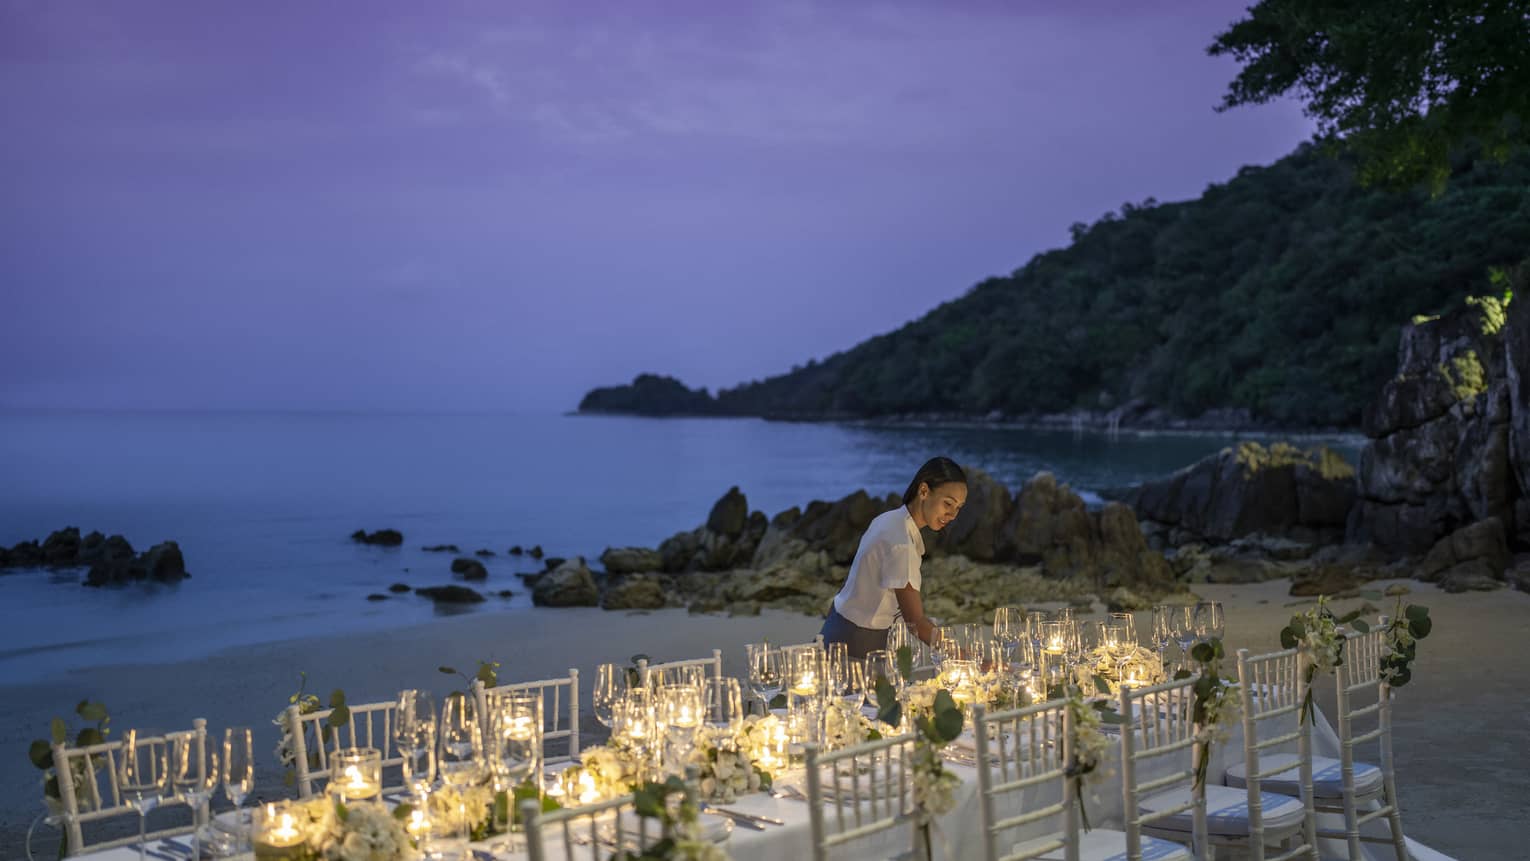 Team member sets up reception table on the beach at dusk